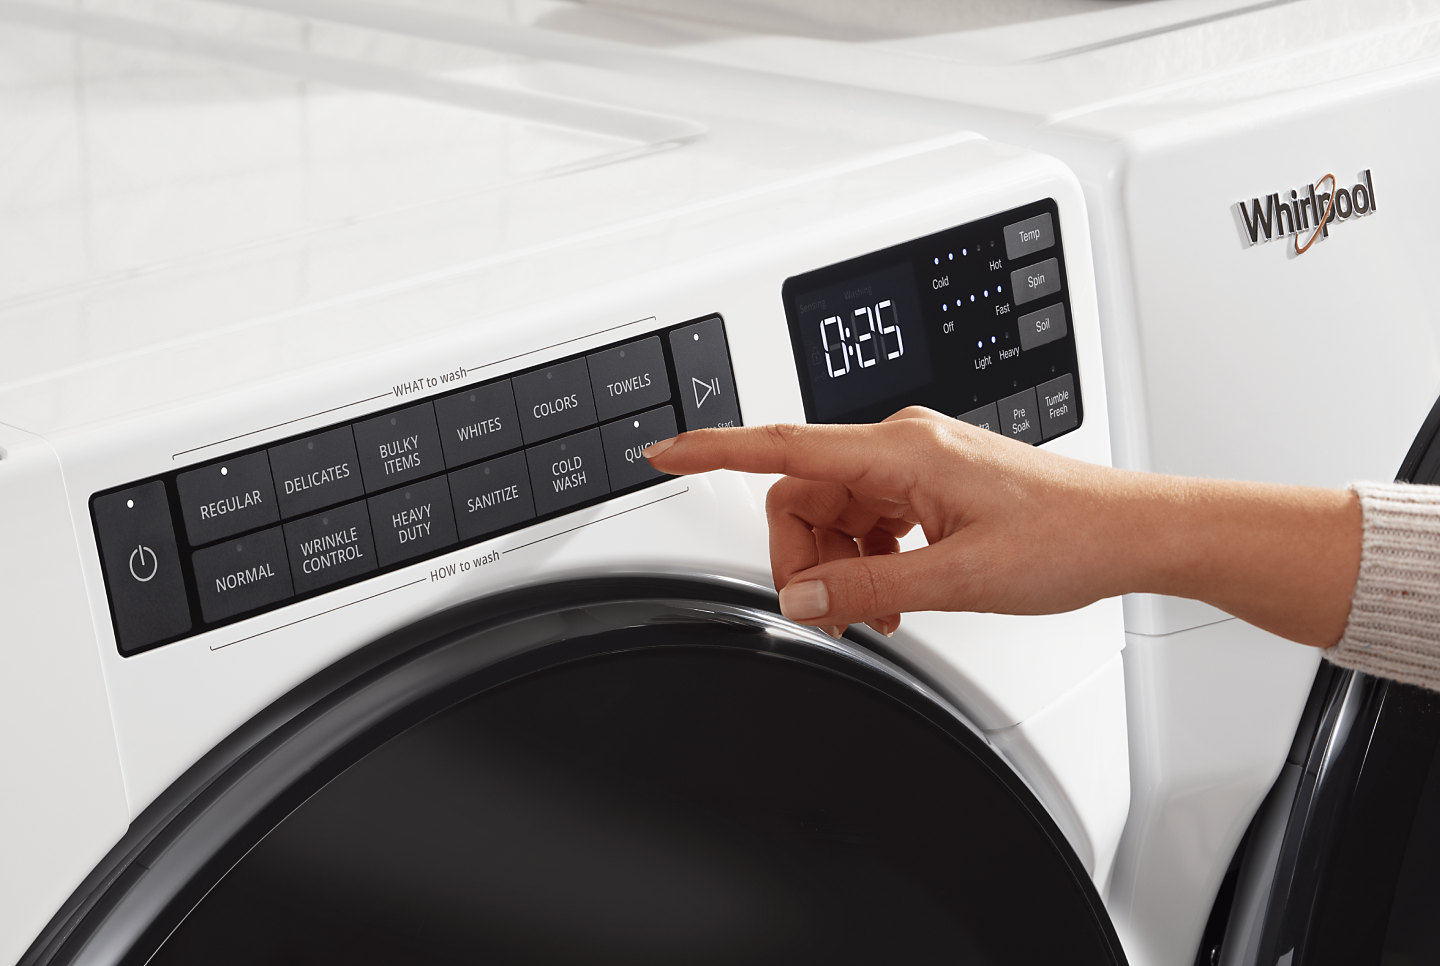 Washer control panel with "Quick" being selected